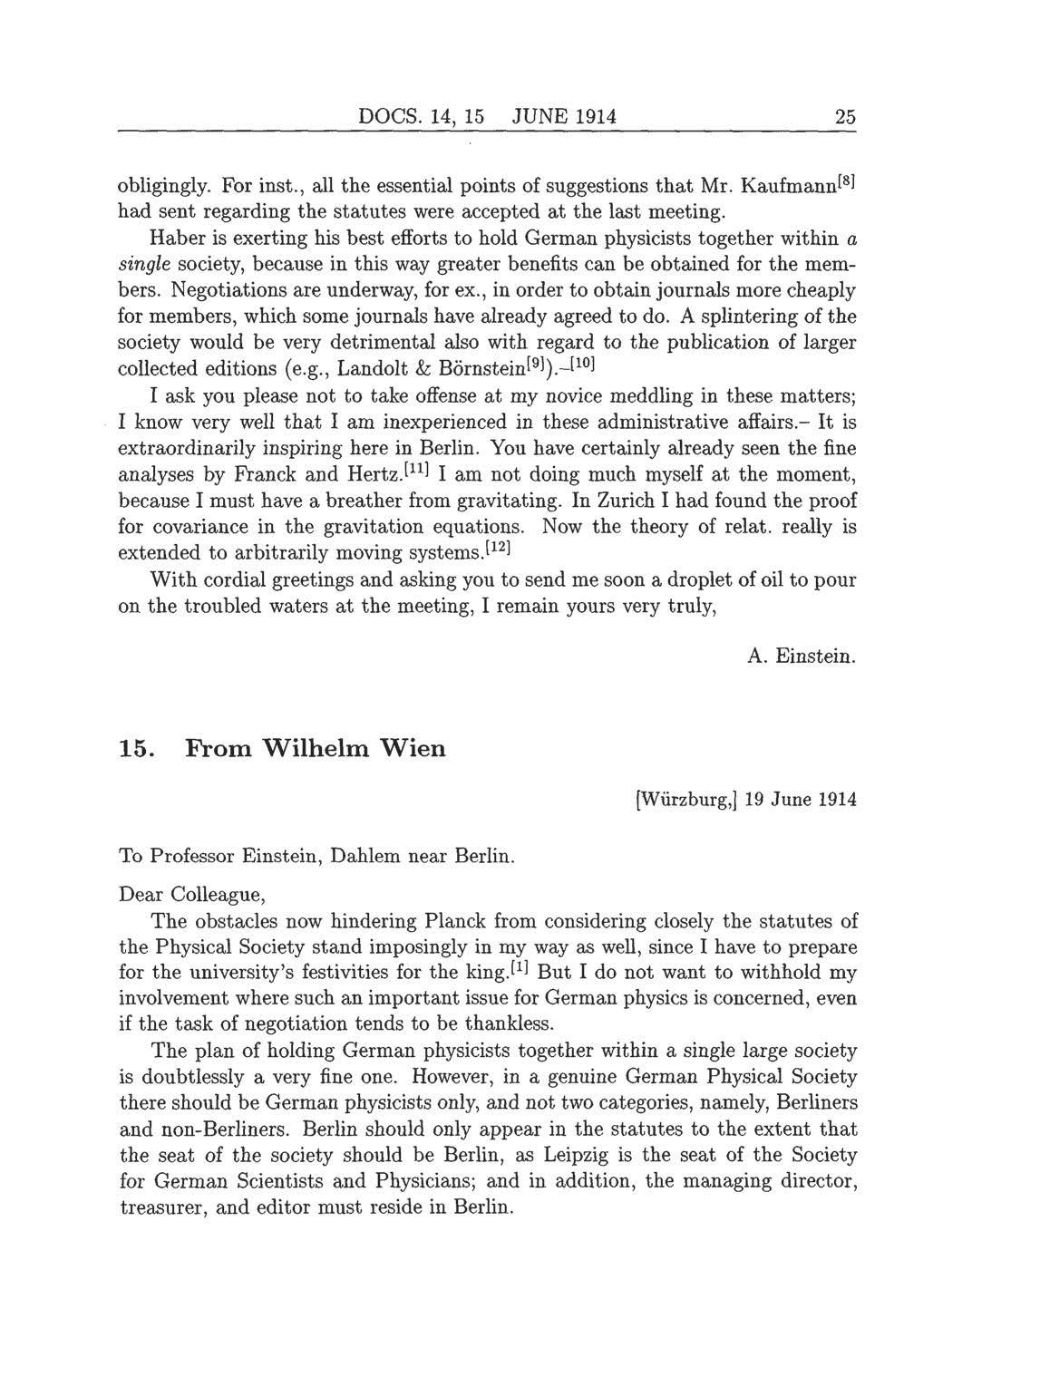 Volume 8: The Berlin Years: Correspondence, 1914-1918 (English translation supplement) page 25